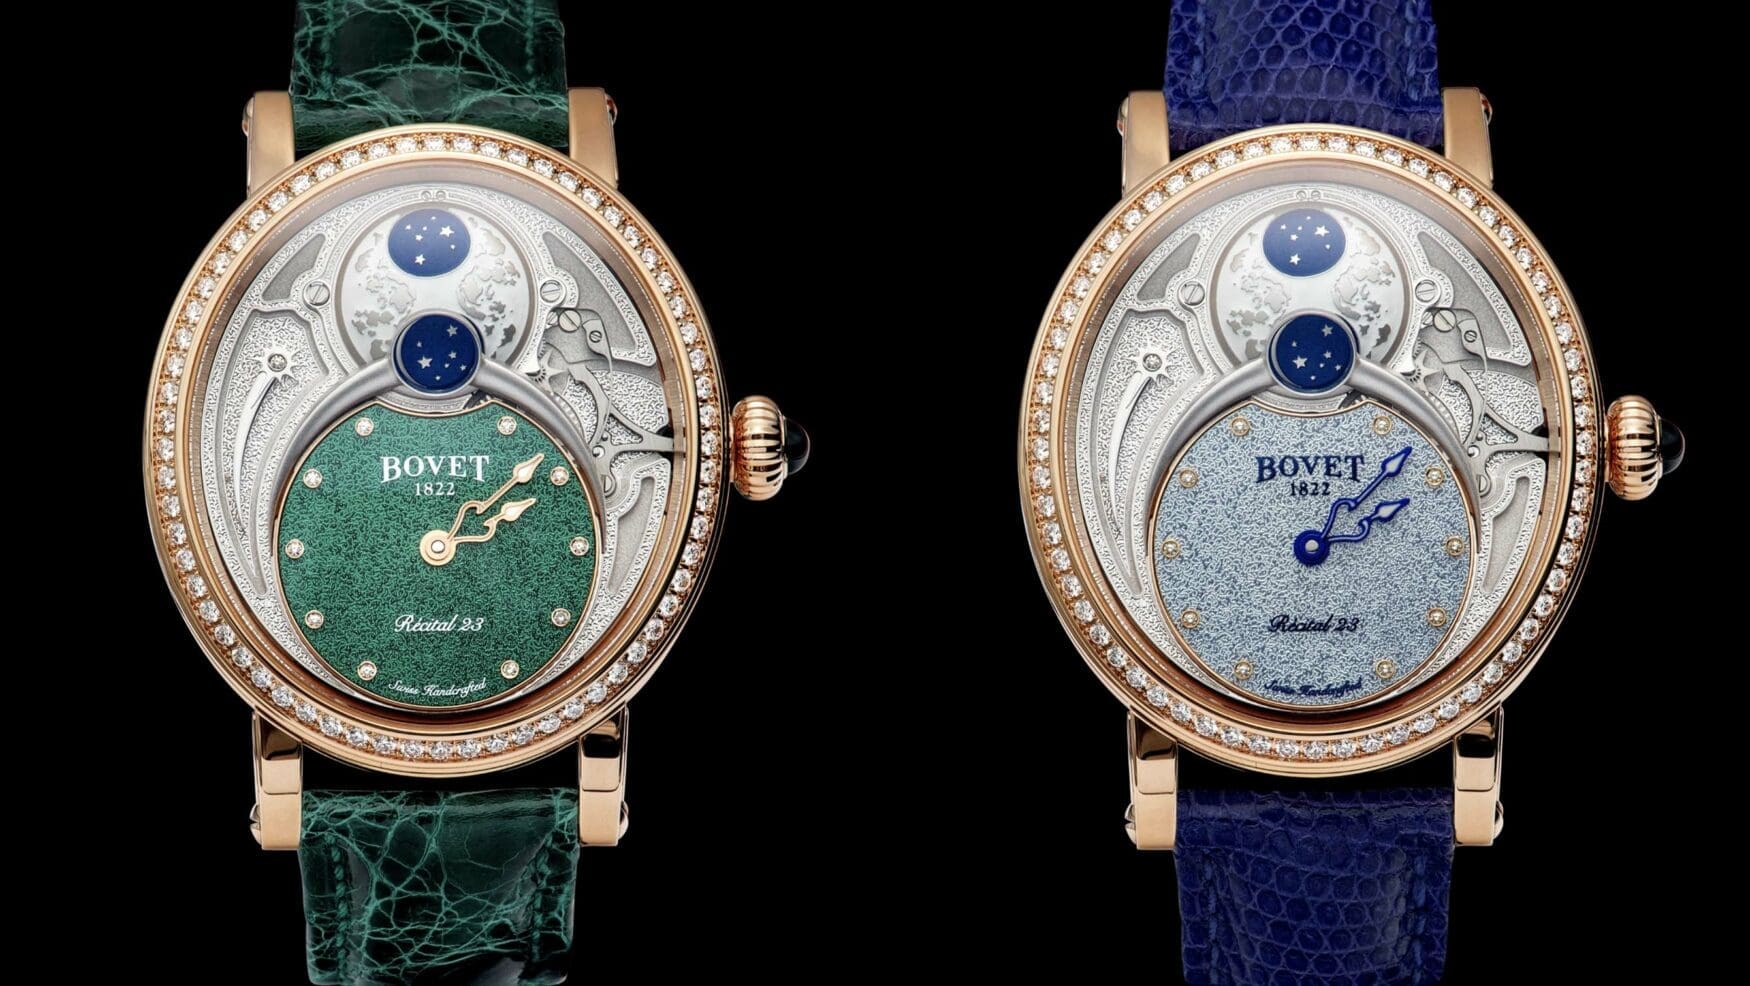 The new Bovet 1822 Récital 23 in green and blue is a visual extravaganza for the wrist